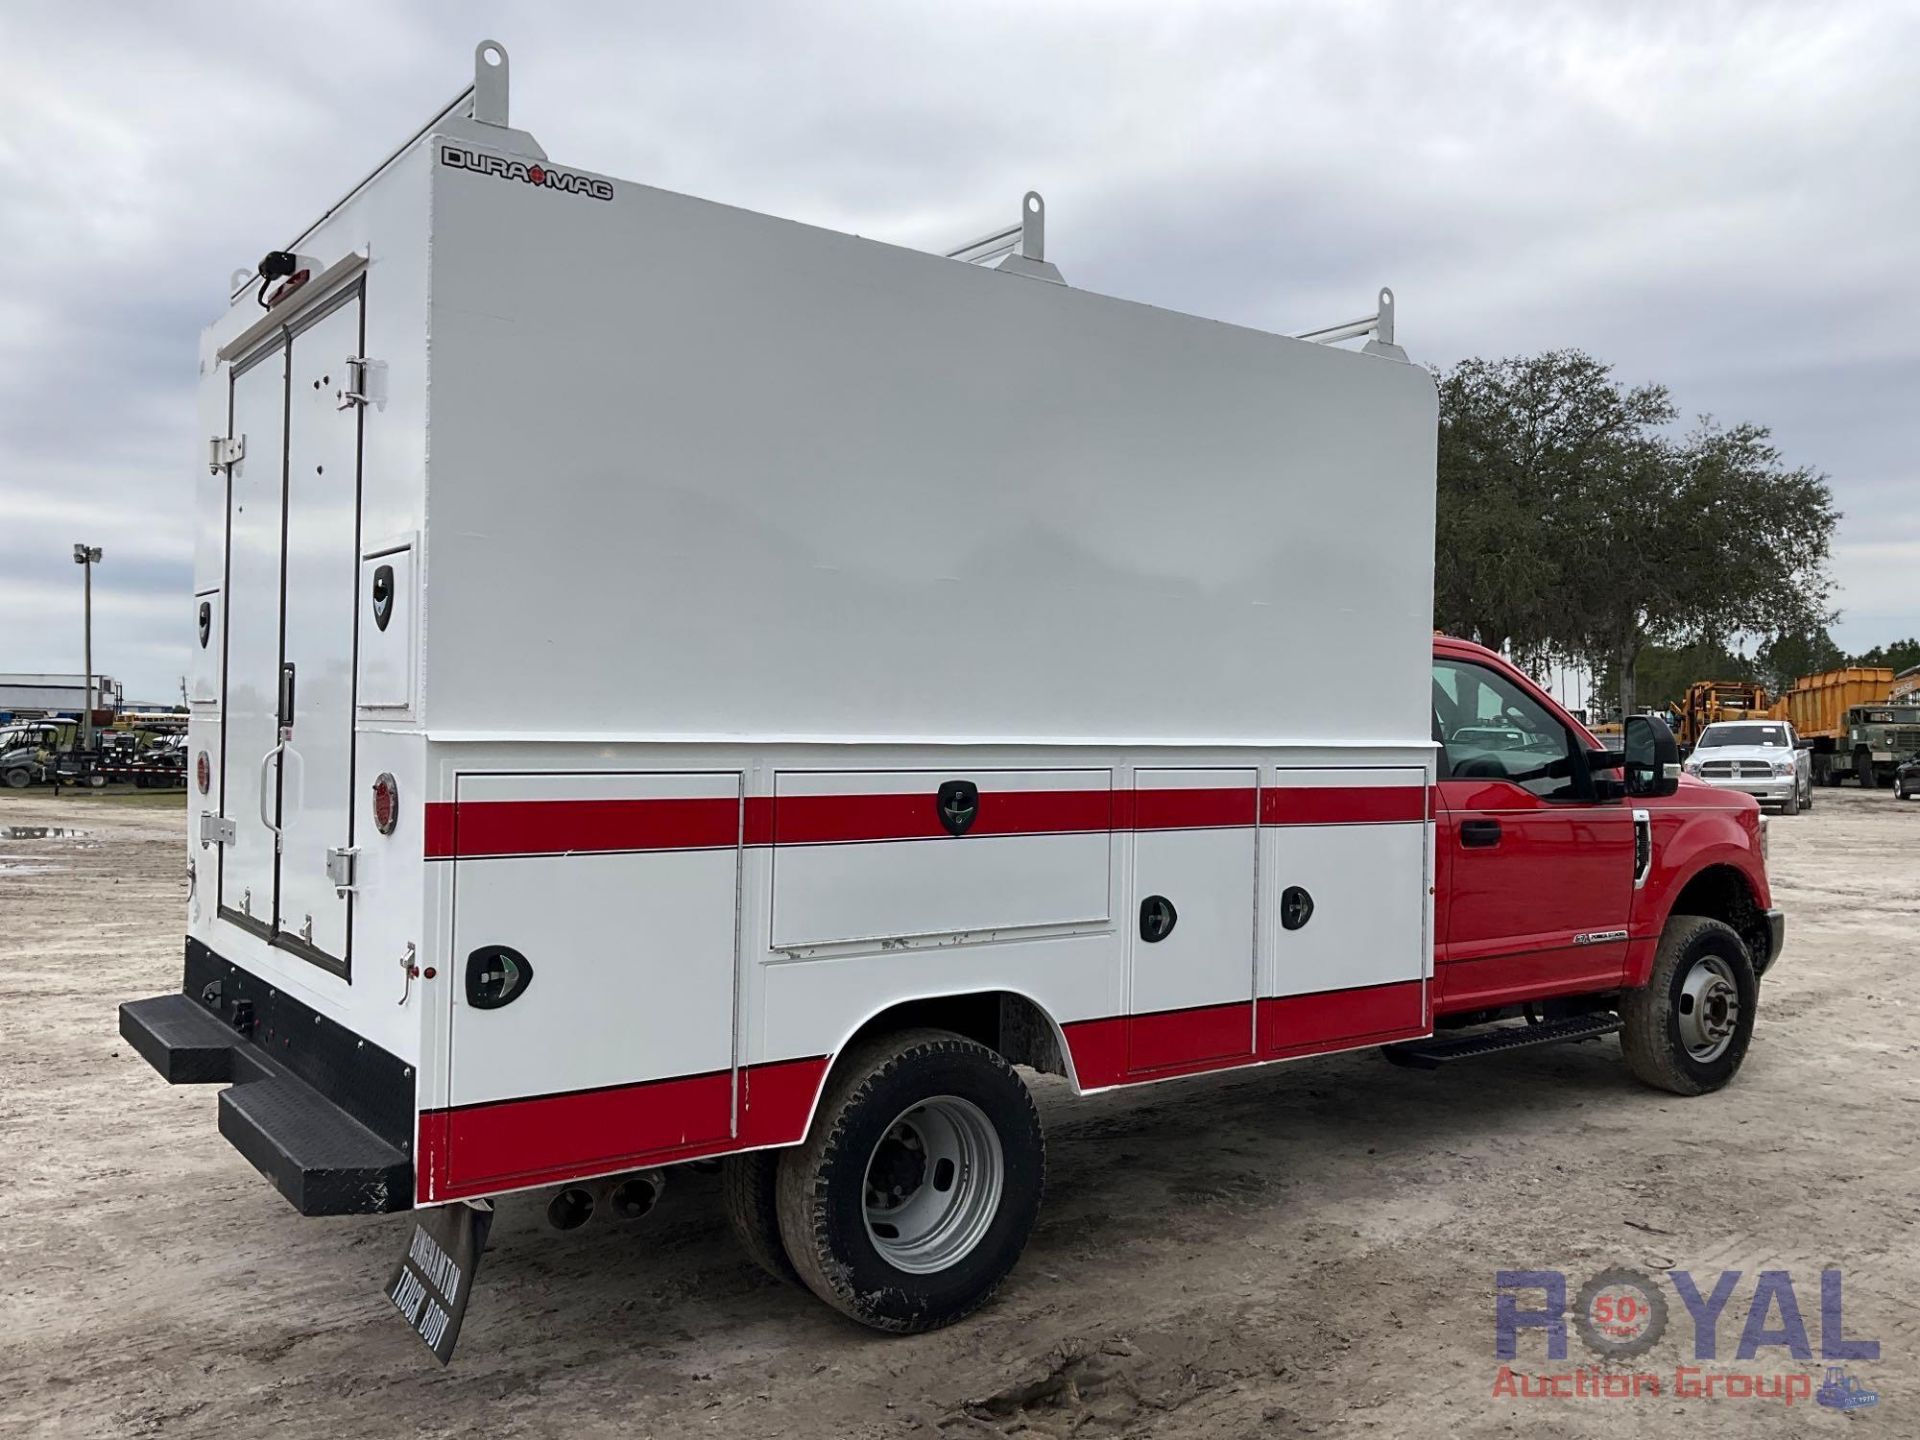 2019 Ford F350 4x4 Service Truck - Image 3 of 30